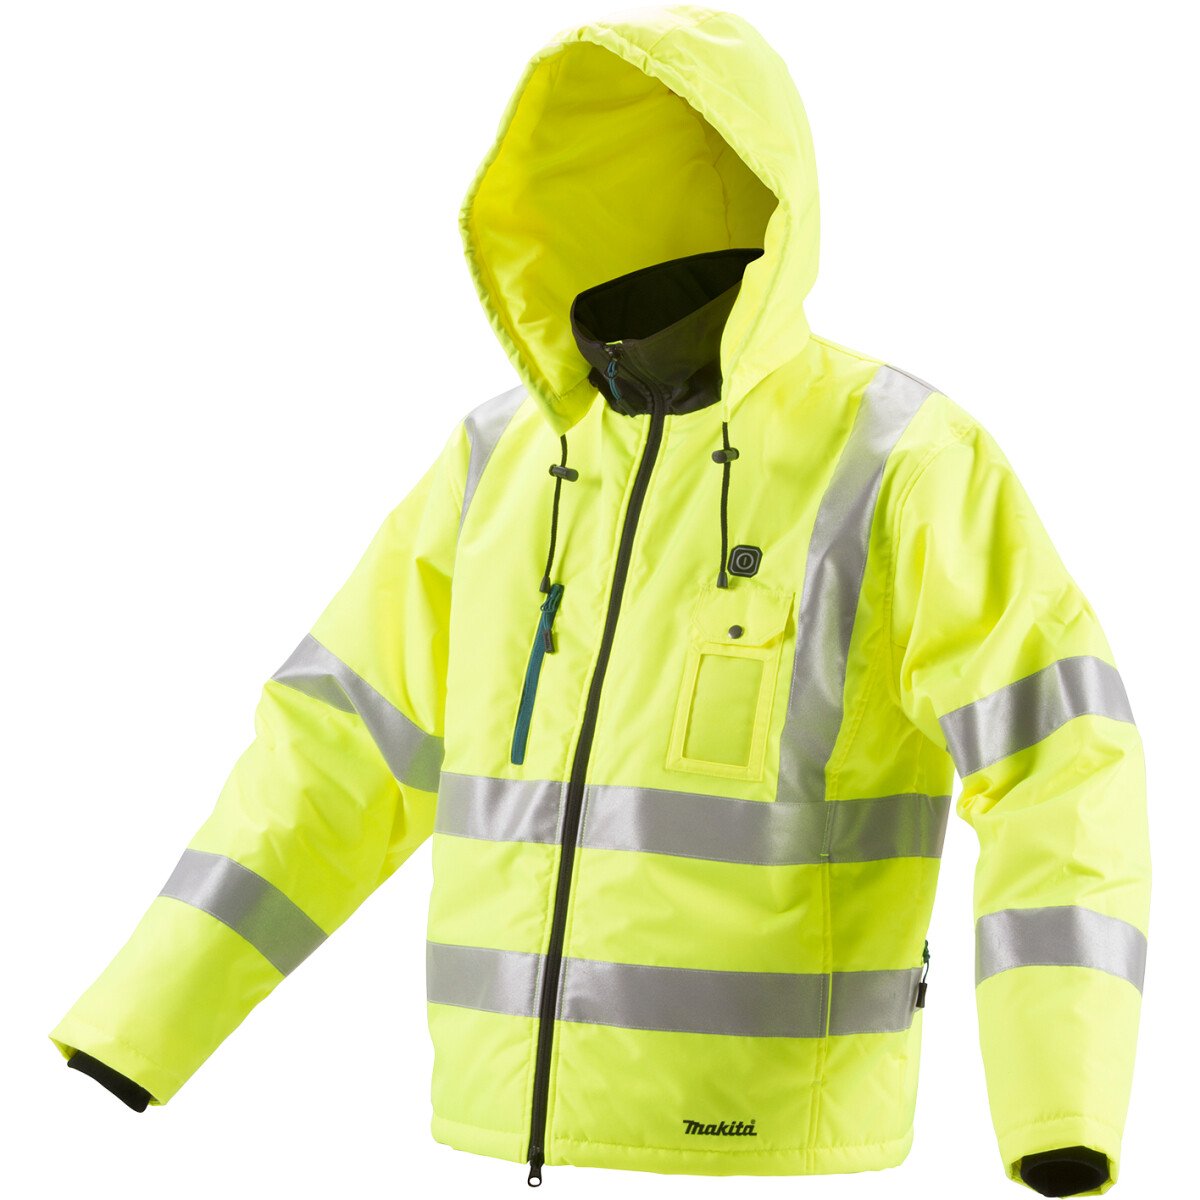 Makita CJ106DZ Body Only 12V CXT Hi-Vis Heated Jacket from Lawson HIS